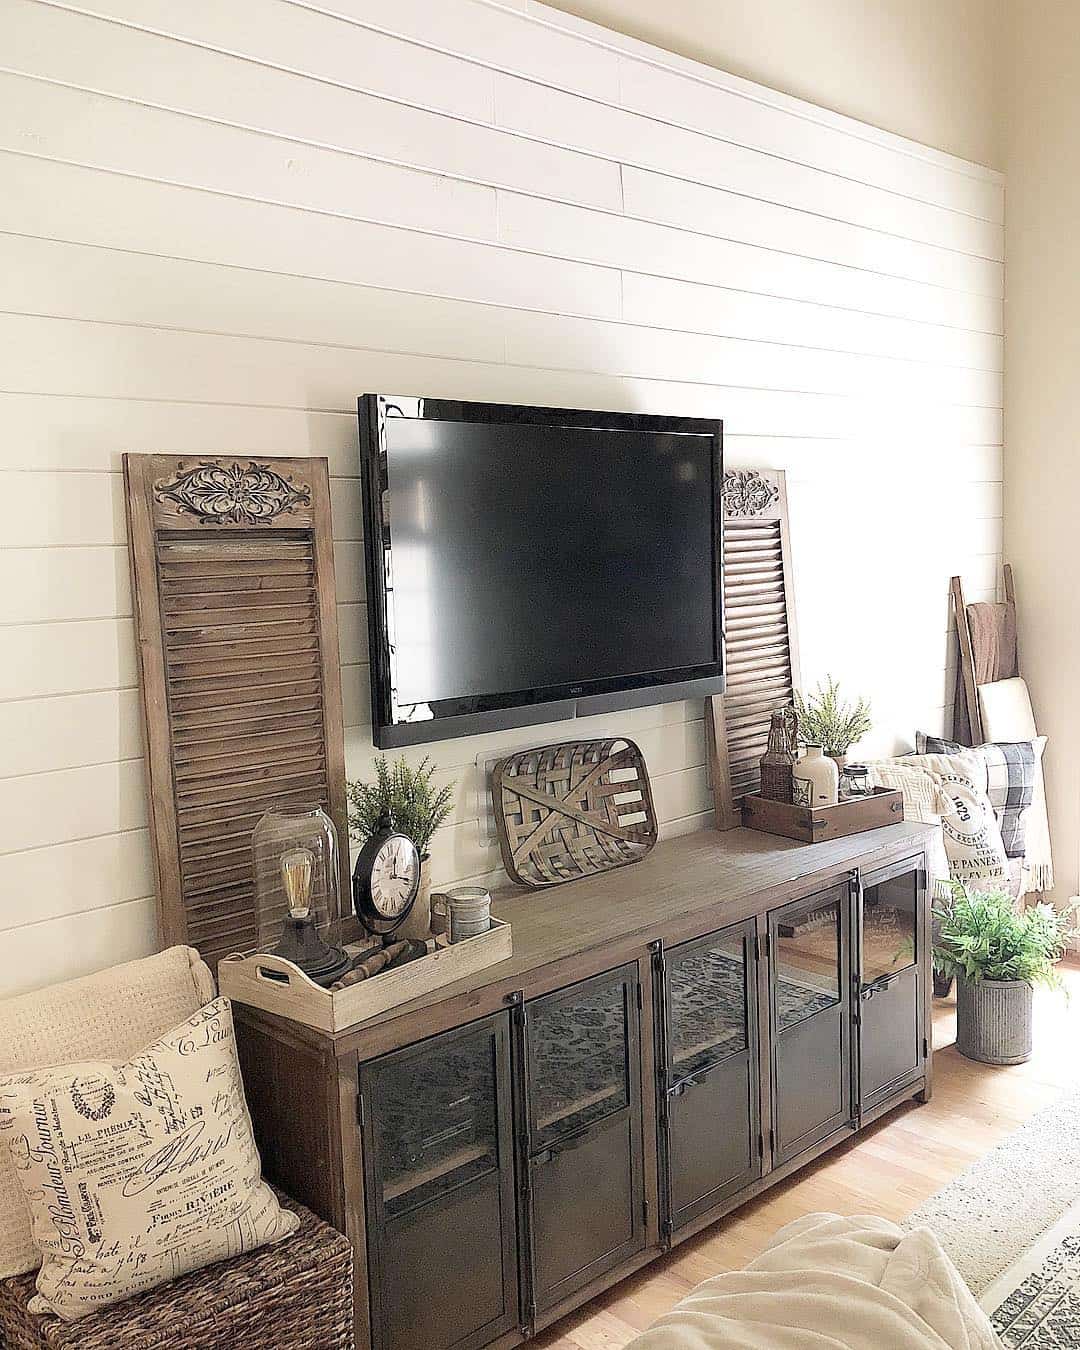 farmhouse TV stand ideas; In this photo, the rustic textures of the wooden shutters provide a striking contrast against the pristine white shiplap walls while effortlessly complementing the TV stand. These shutters also create a captivating backdrop for the charming wooden tray vignettes adorned with vintage décor. Additionally, the inclusion of a wicker basket in the center adds a tactile element that harmonizes and completes the overall composition.